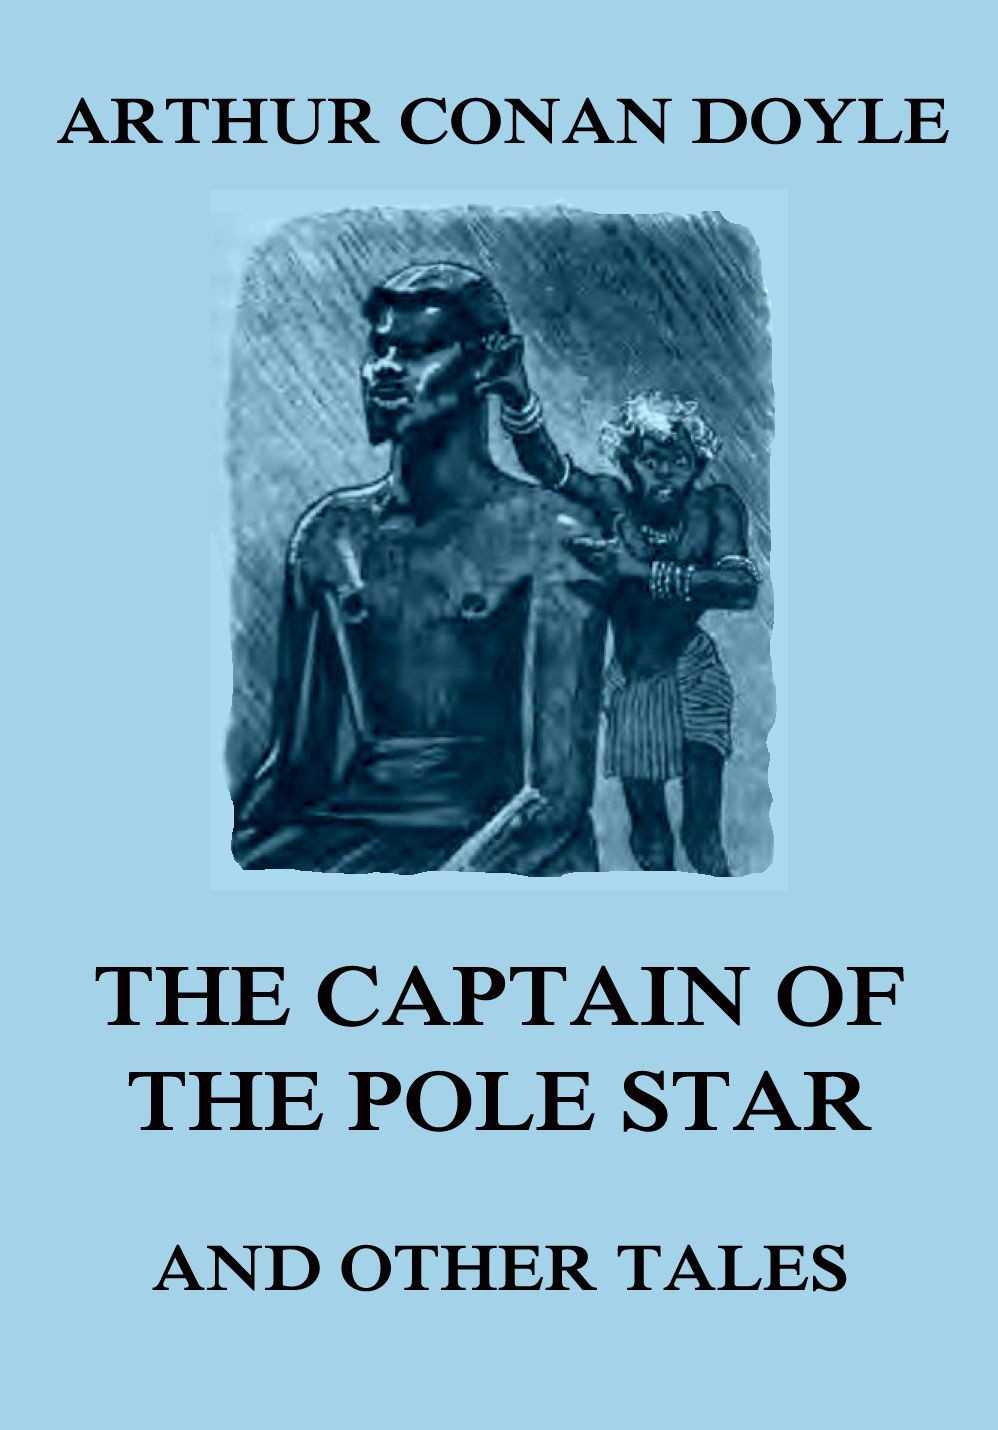 The Captain of the Polestar and Other Tales (1890): Collecting 10 Short Stories